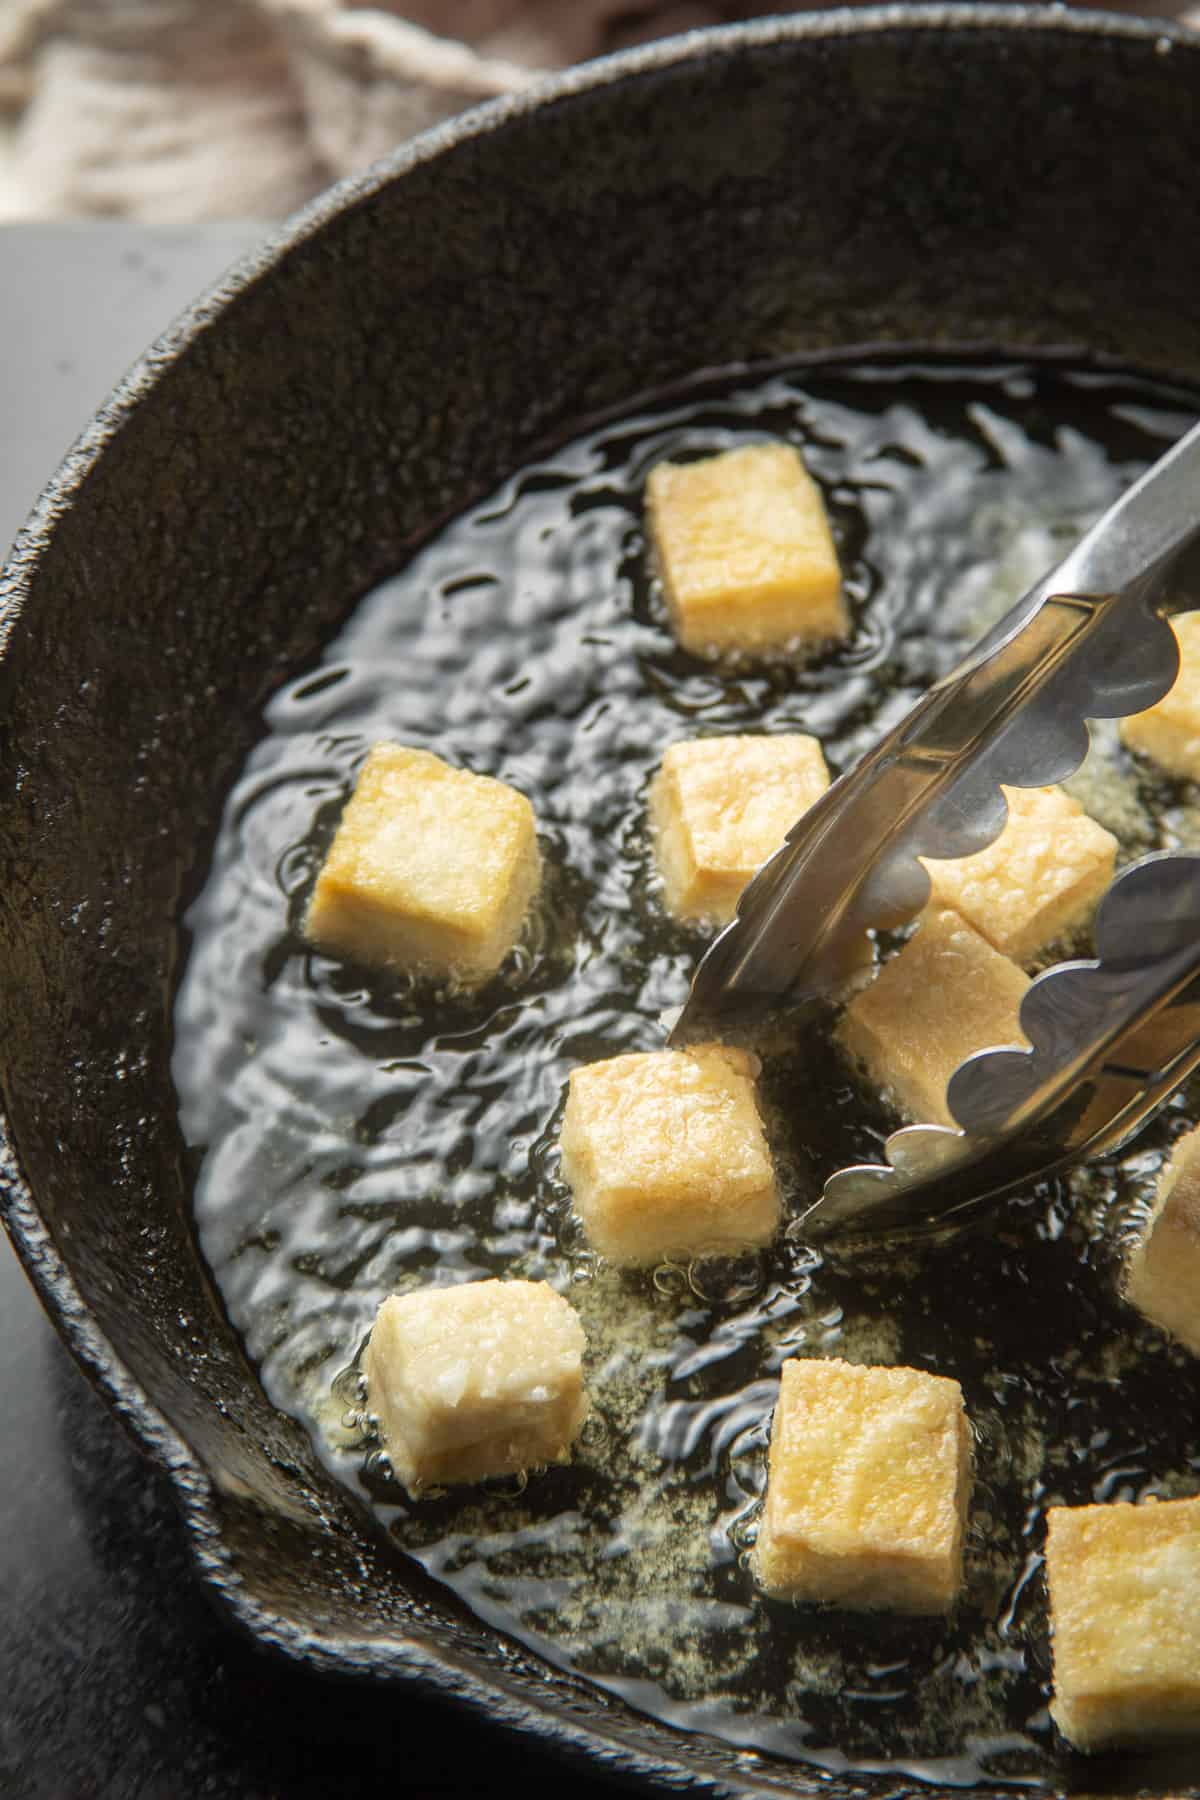 Pair of tongs grabbing a piece of Fried Tofu from a skillet.